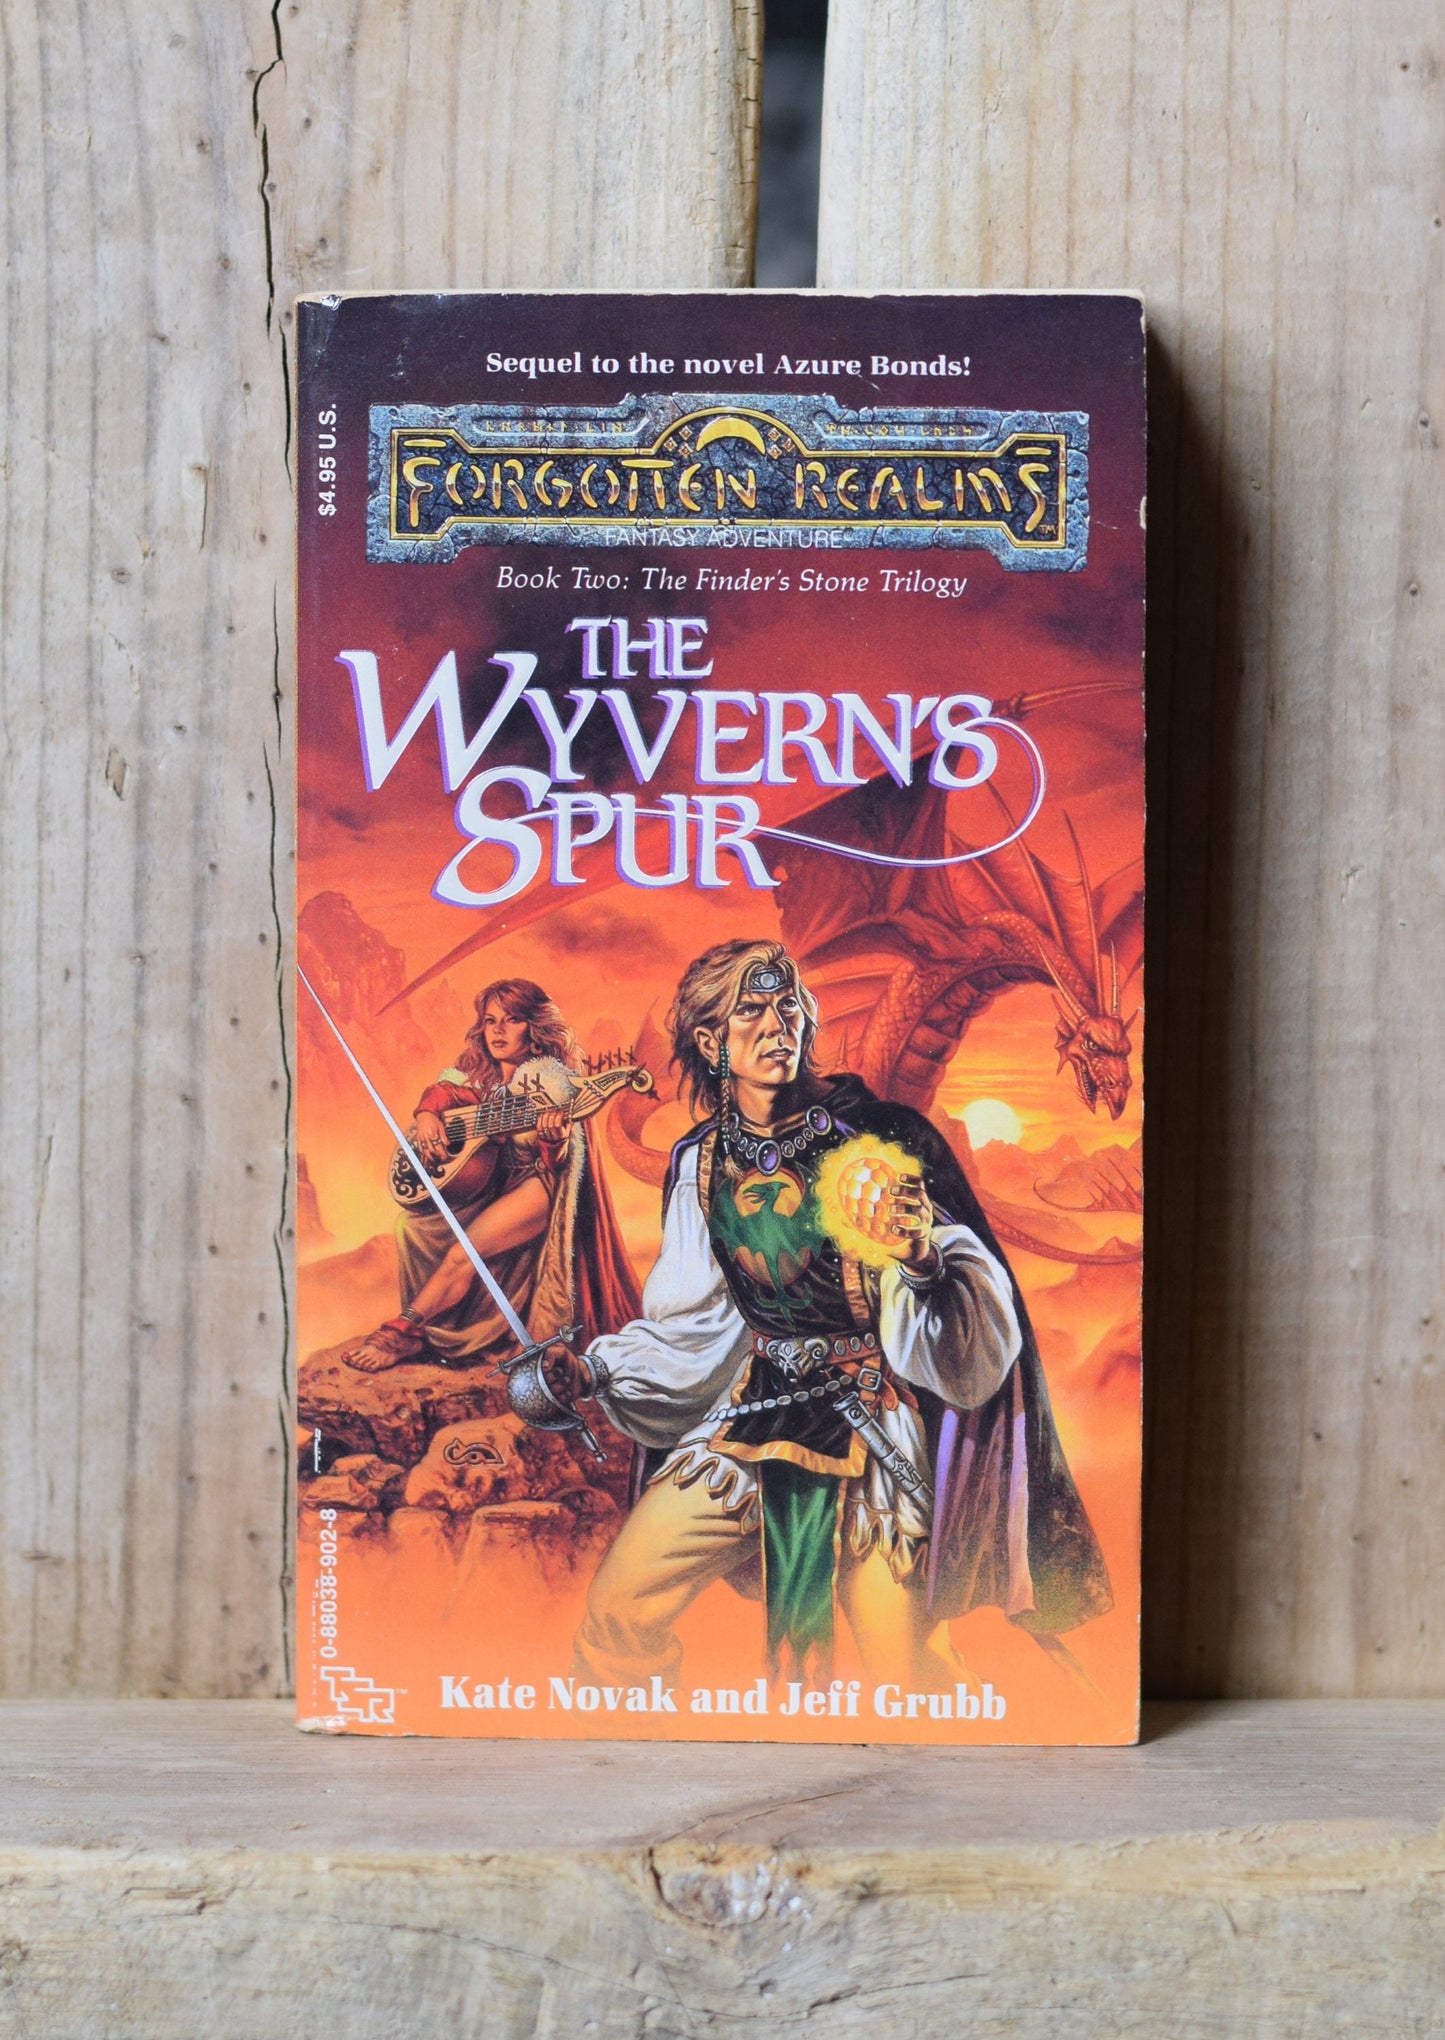 Vintage Dungeons & Dragons Paperback Novel: Kate Novak and Jeff Grubb - The Wyvern's Spur FIRST PRINTING